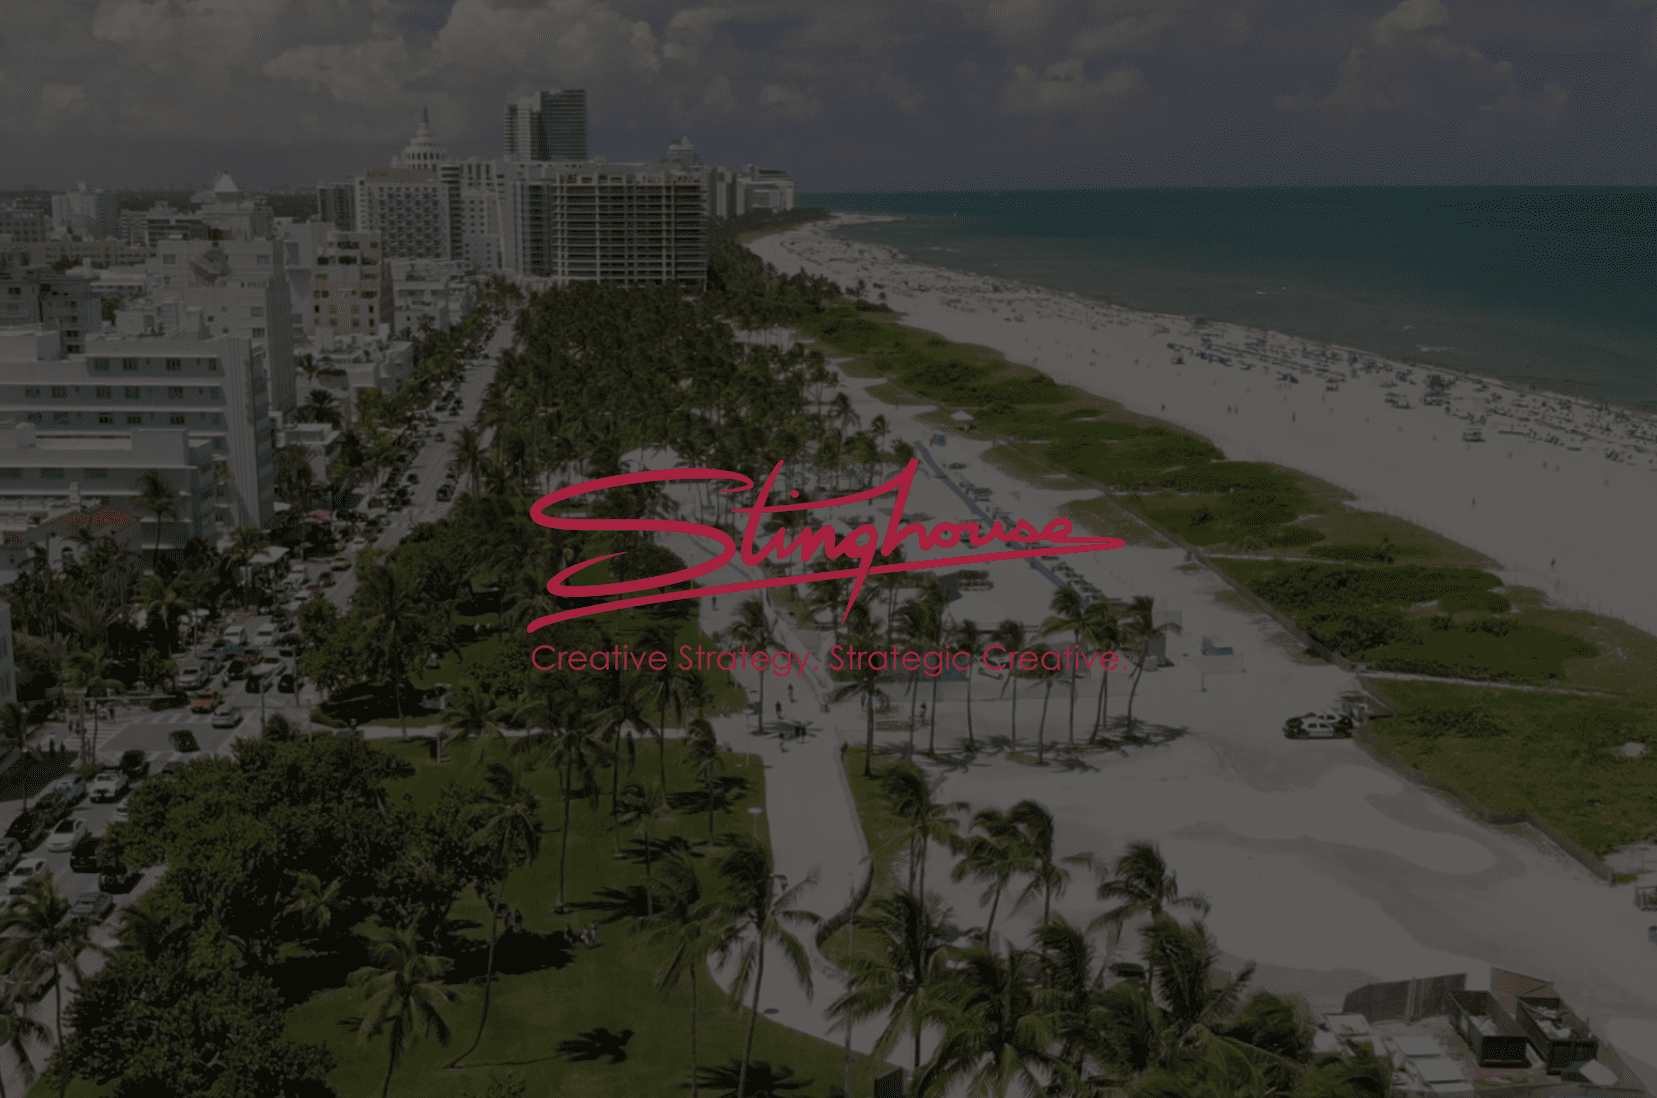 Red Stinghouse Creative Strategy Strategic Creative logo with a background overhead view of a beachfront with beach on right and buildings nearby on left. In the middle are many trees and palm trees.